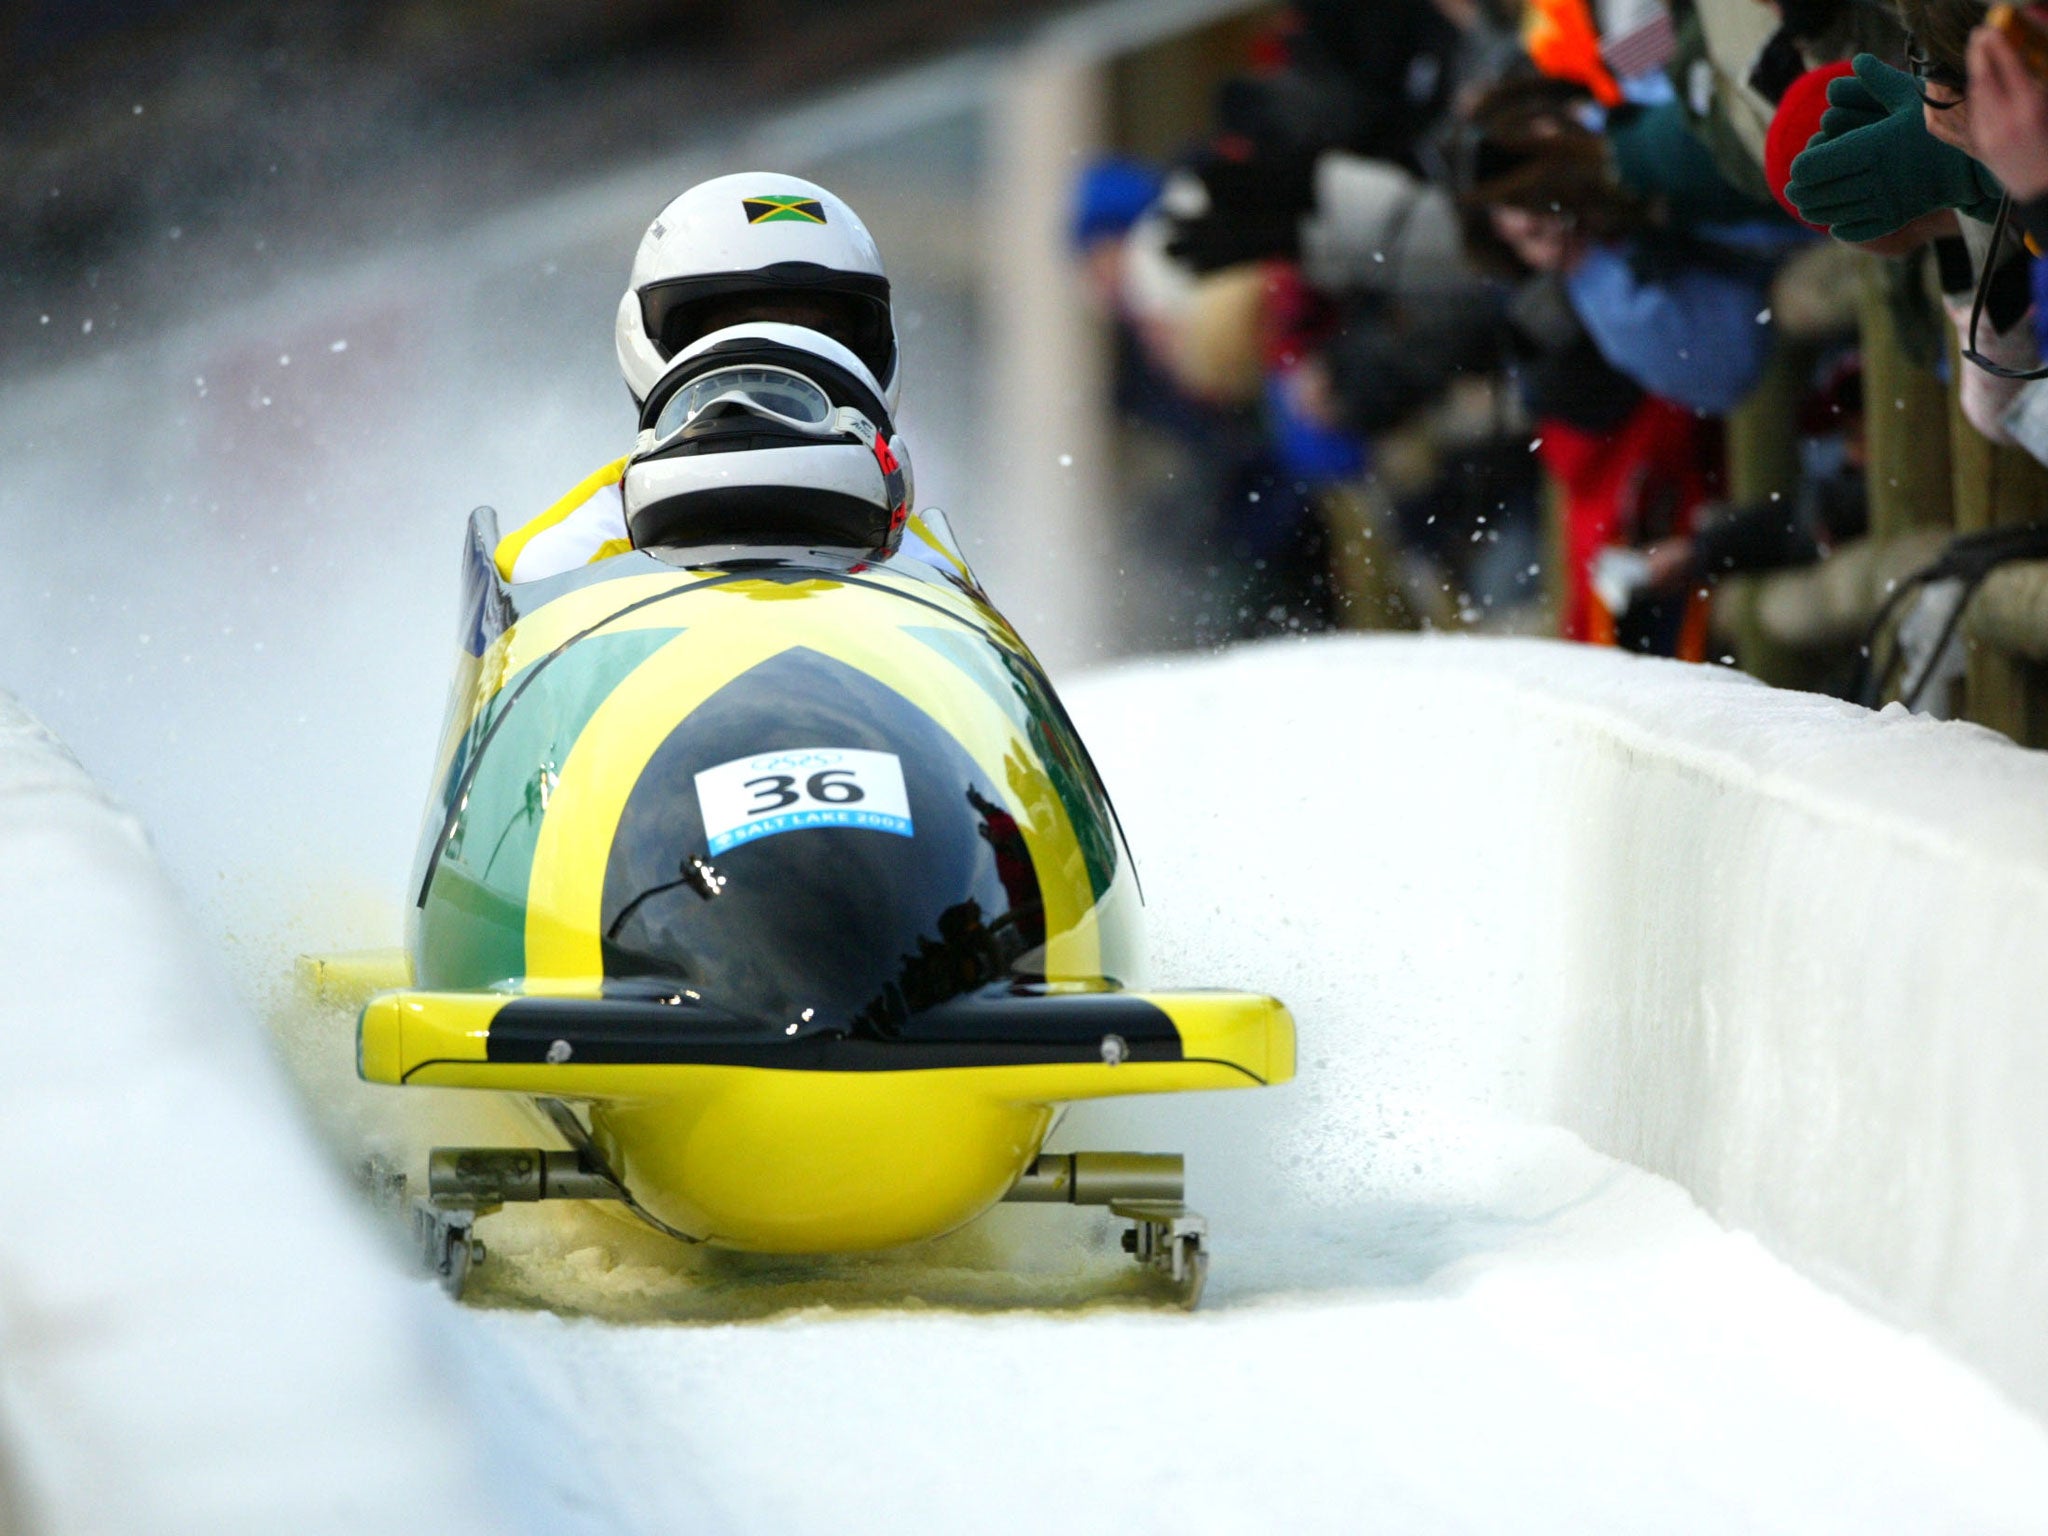 The Jamaican bobsleigh team of Winston Alexander Watt and Lascelles Oneil Brown in action in the Men's Two-Man Bobsleigh event during the Salt Lake City Winter Olympic Games 2002, in Utah.